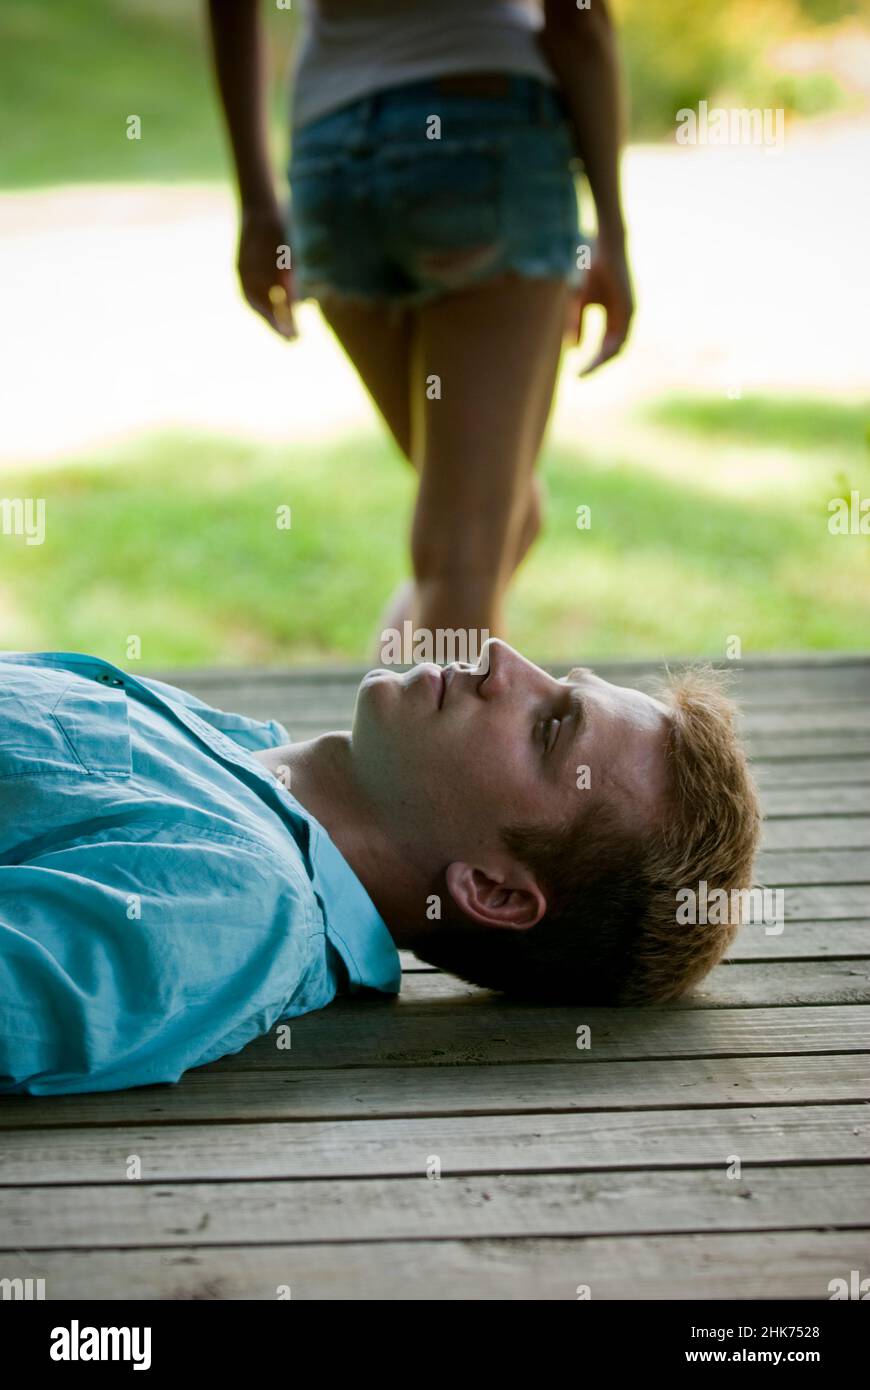 Young man laying down on porch with woman standing in back Stock Photo